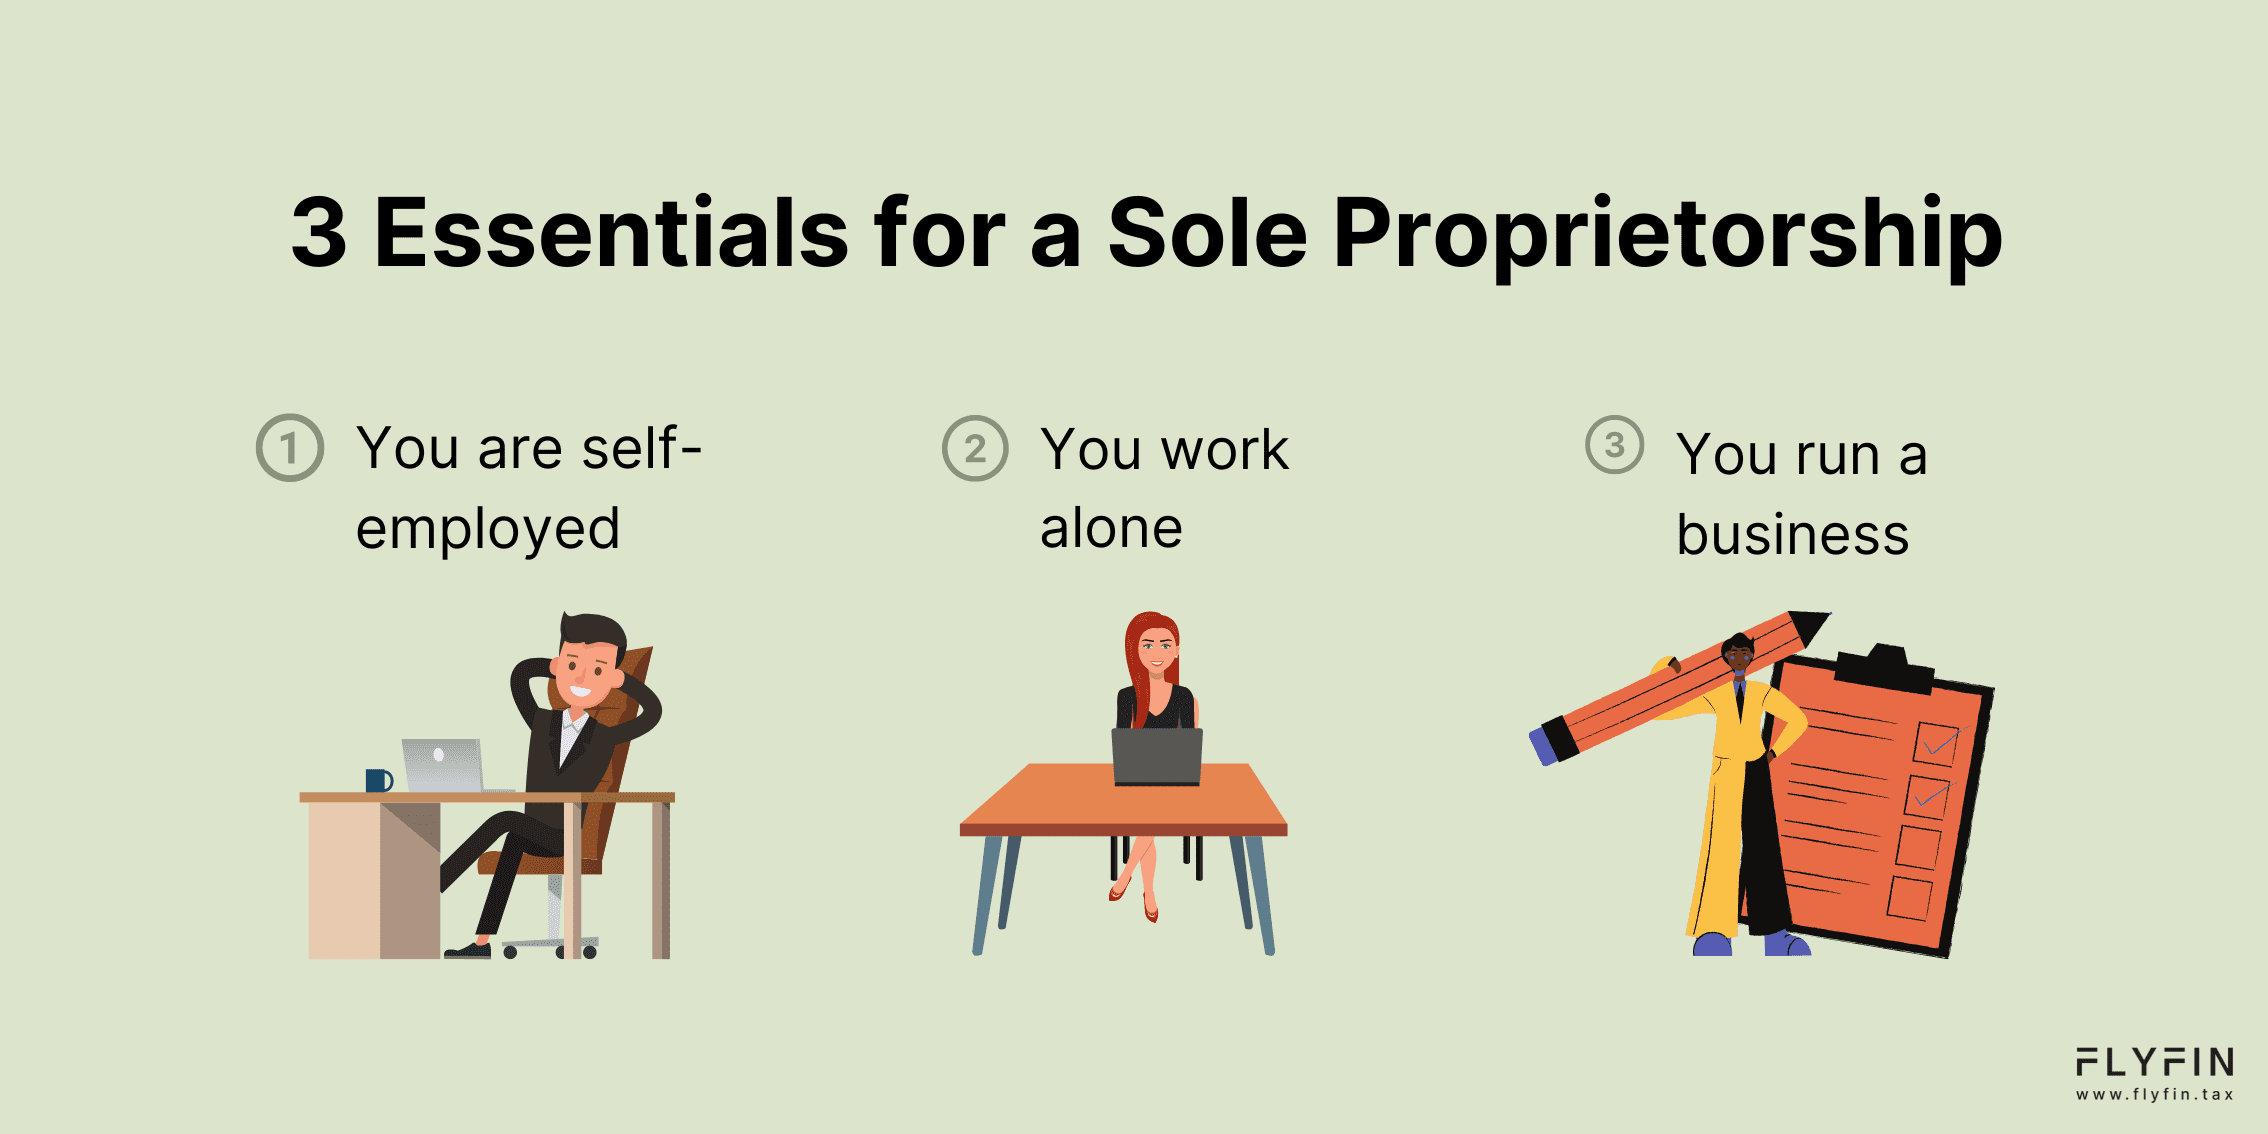 Image of text listing 3 essentials for a sole proprietorship. It mentions that the person is self-employed, works alone and runs a business named FLYFIN. No mention of 1099, freelancer or taxes.